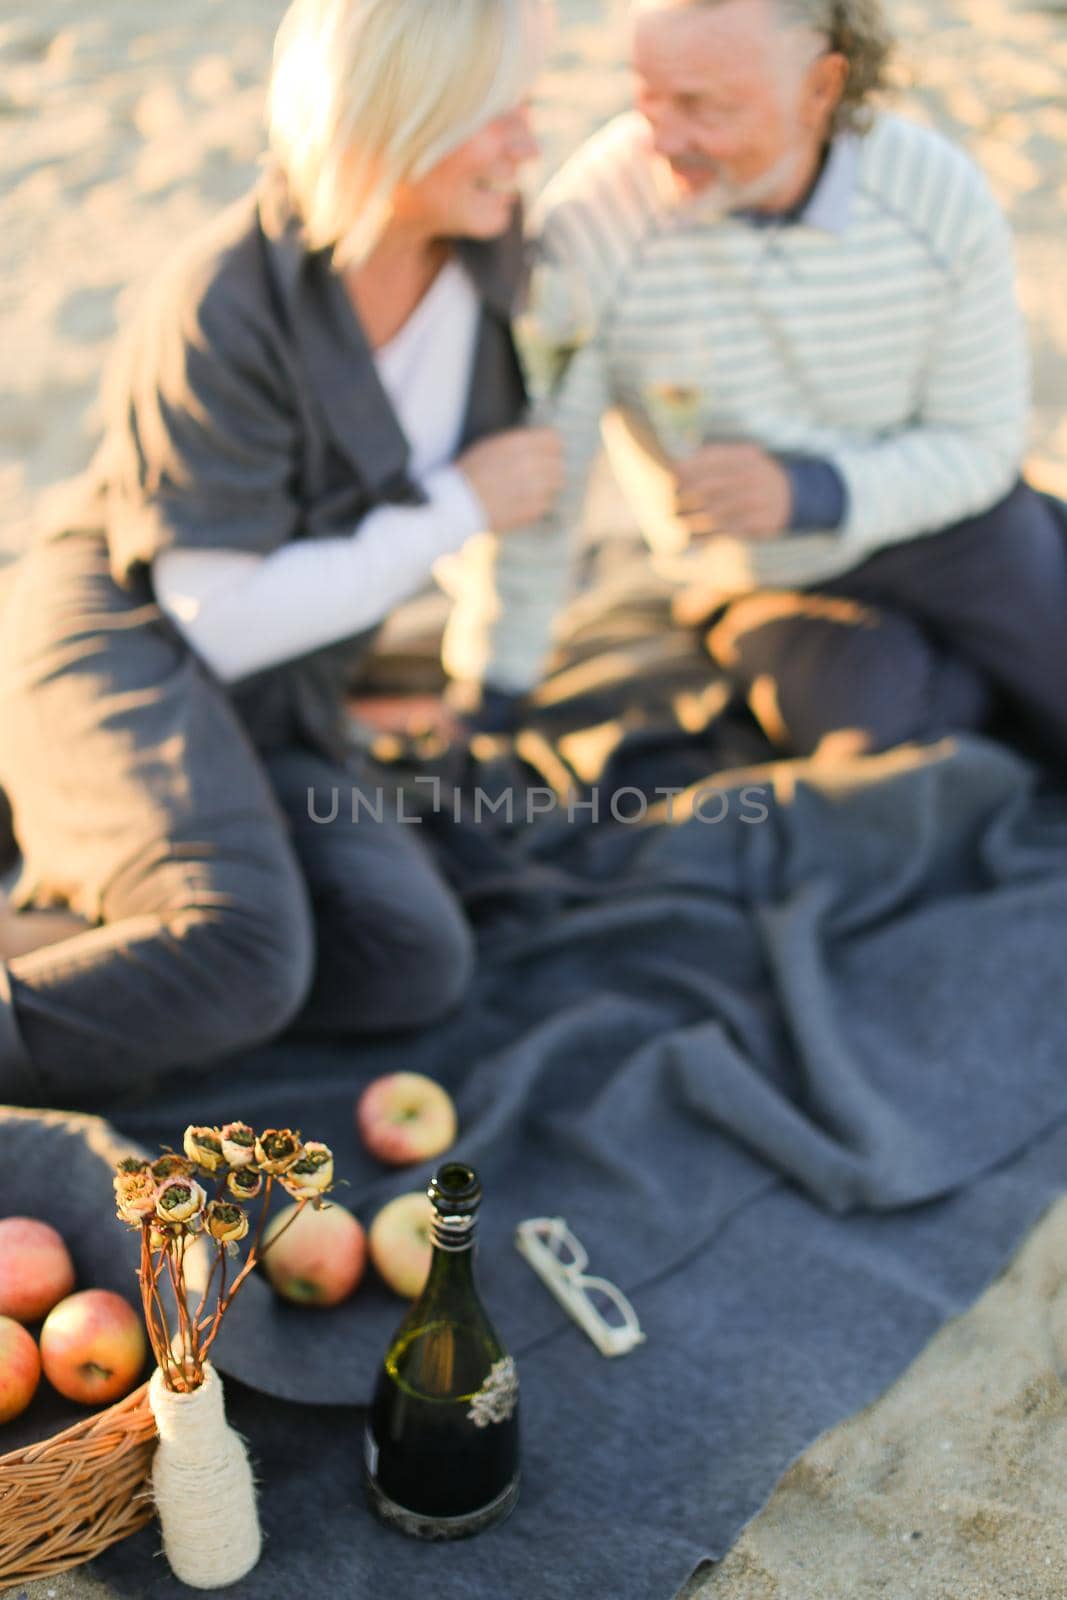 Focus on champagne bottle and fruits, pensioners with glasses sitting on plaid on sand beach in blurry background. Concept of elderly couple on picnic.